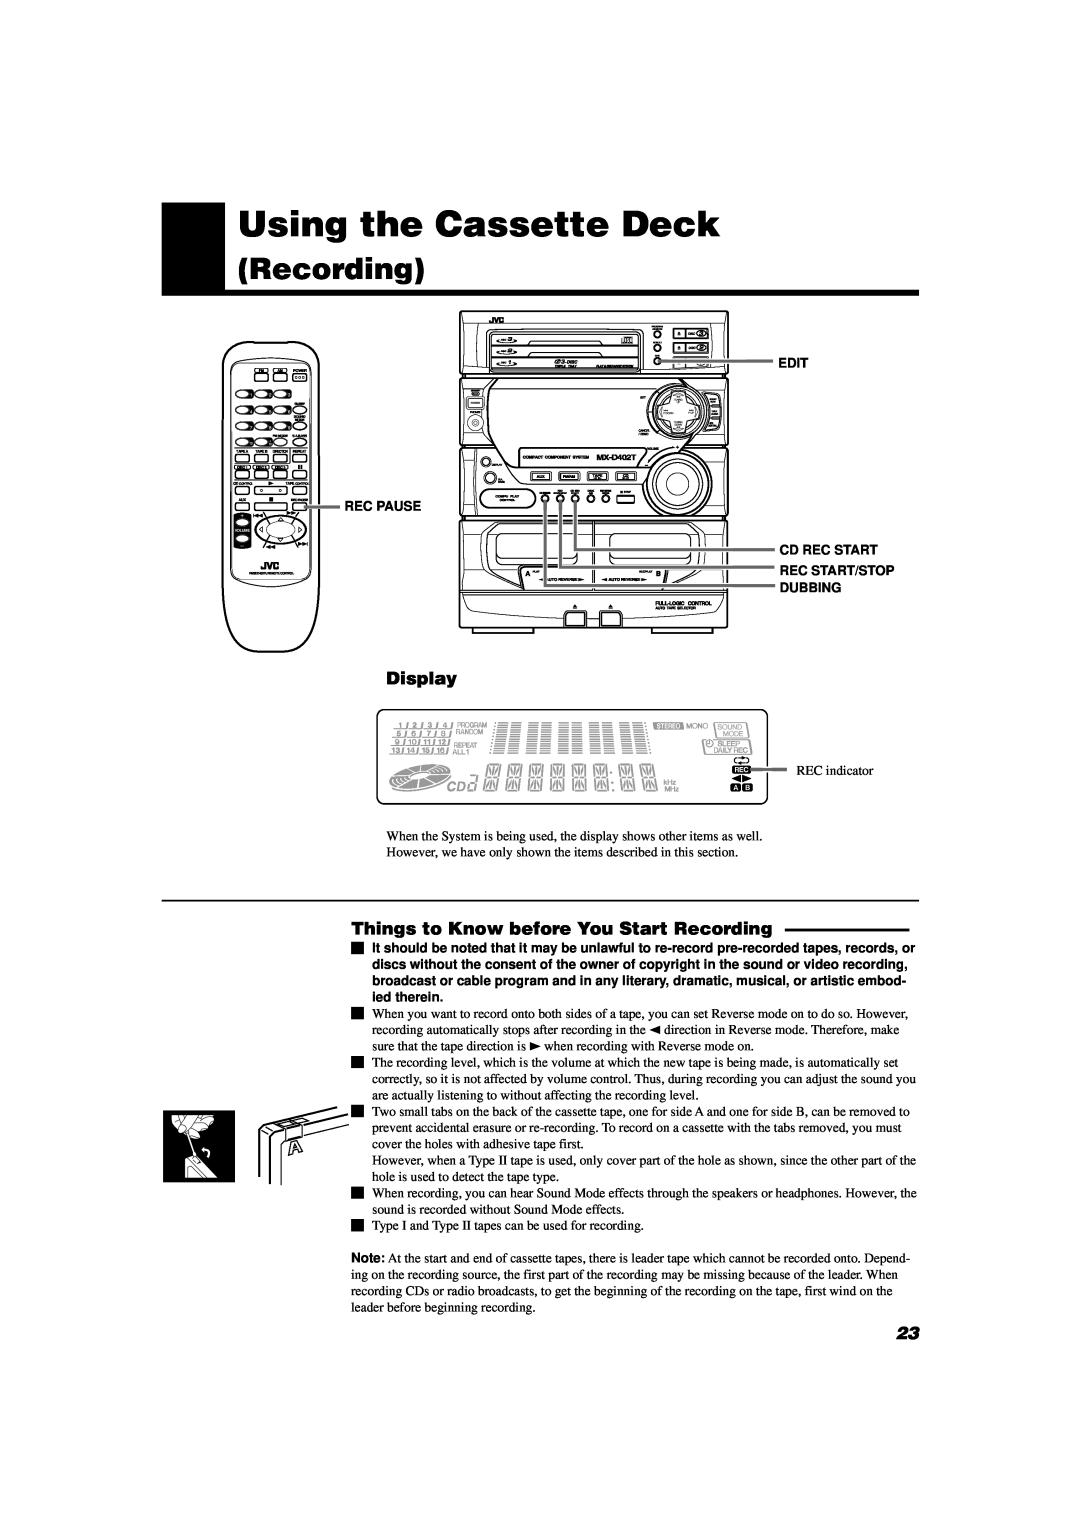 JVC MX-D402T manual Using the Cassette Deck, Display, Things to Know before You Start Recording, Rec Pause 